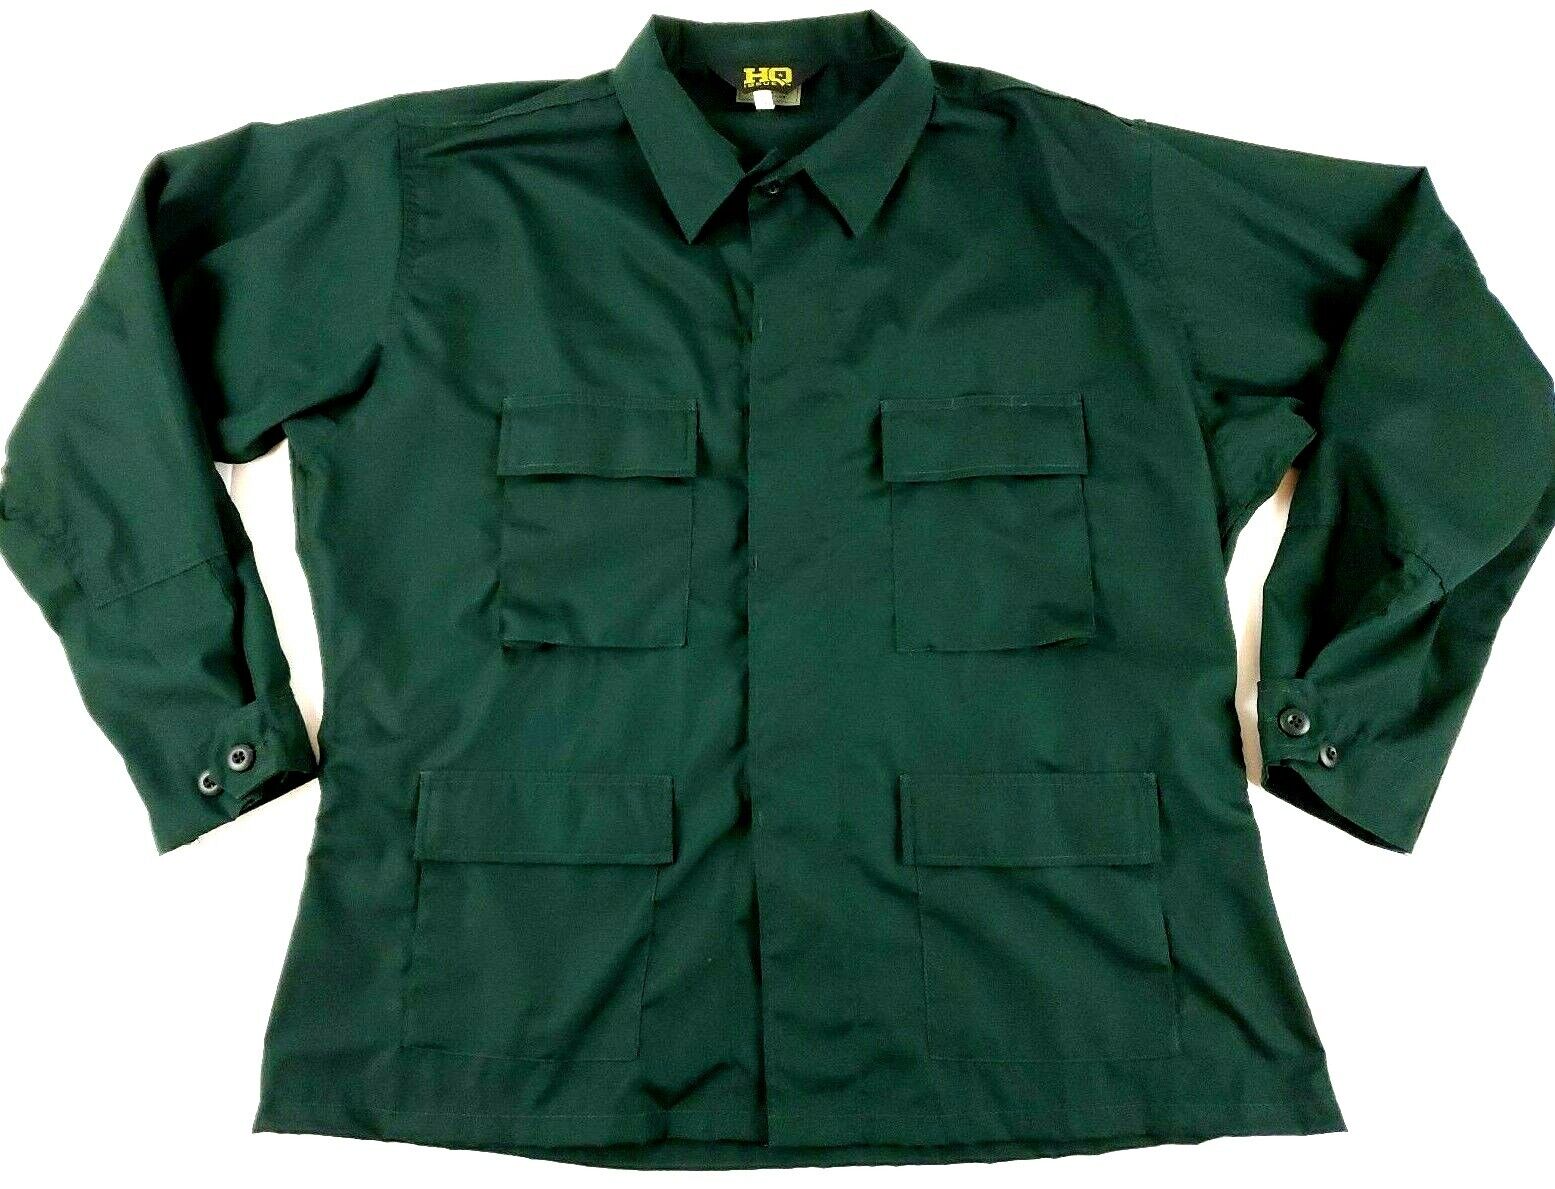 HQ Issue Shirt Mens XL US Military Grid Style Green 4 Pockets Button Up Hunting